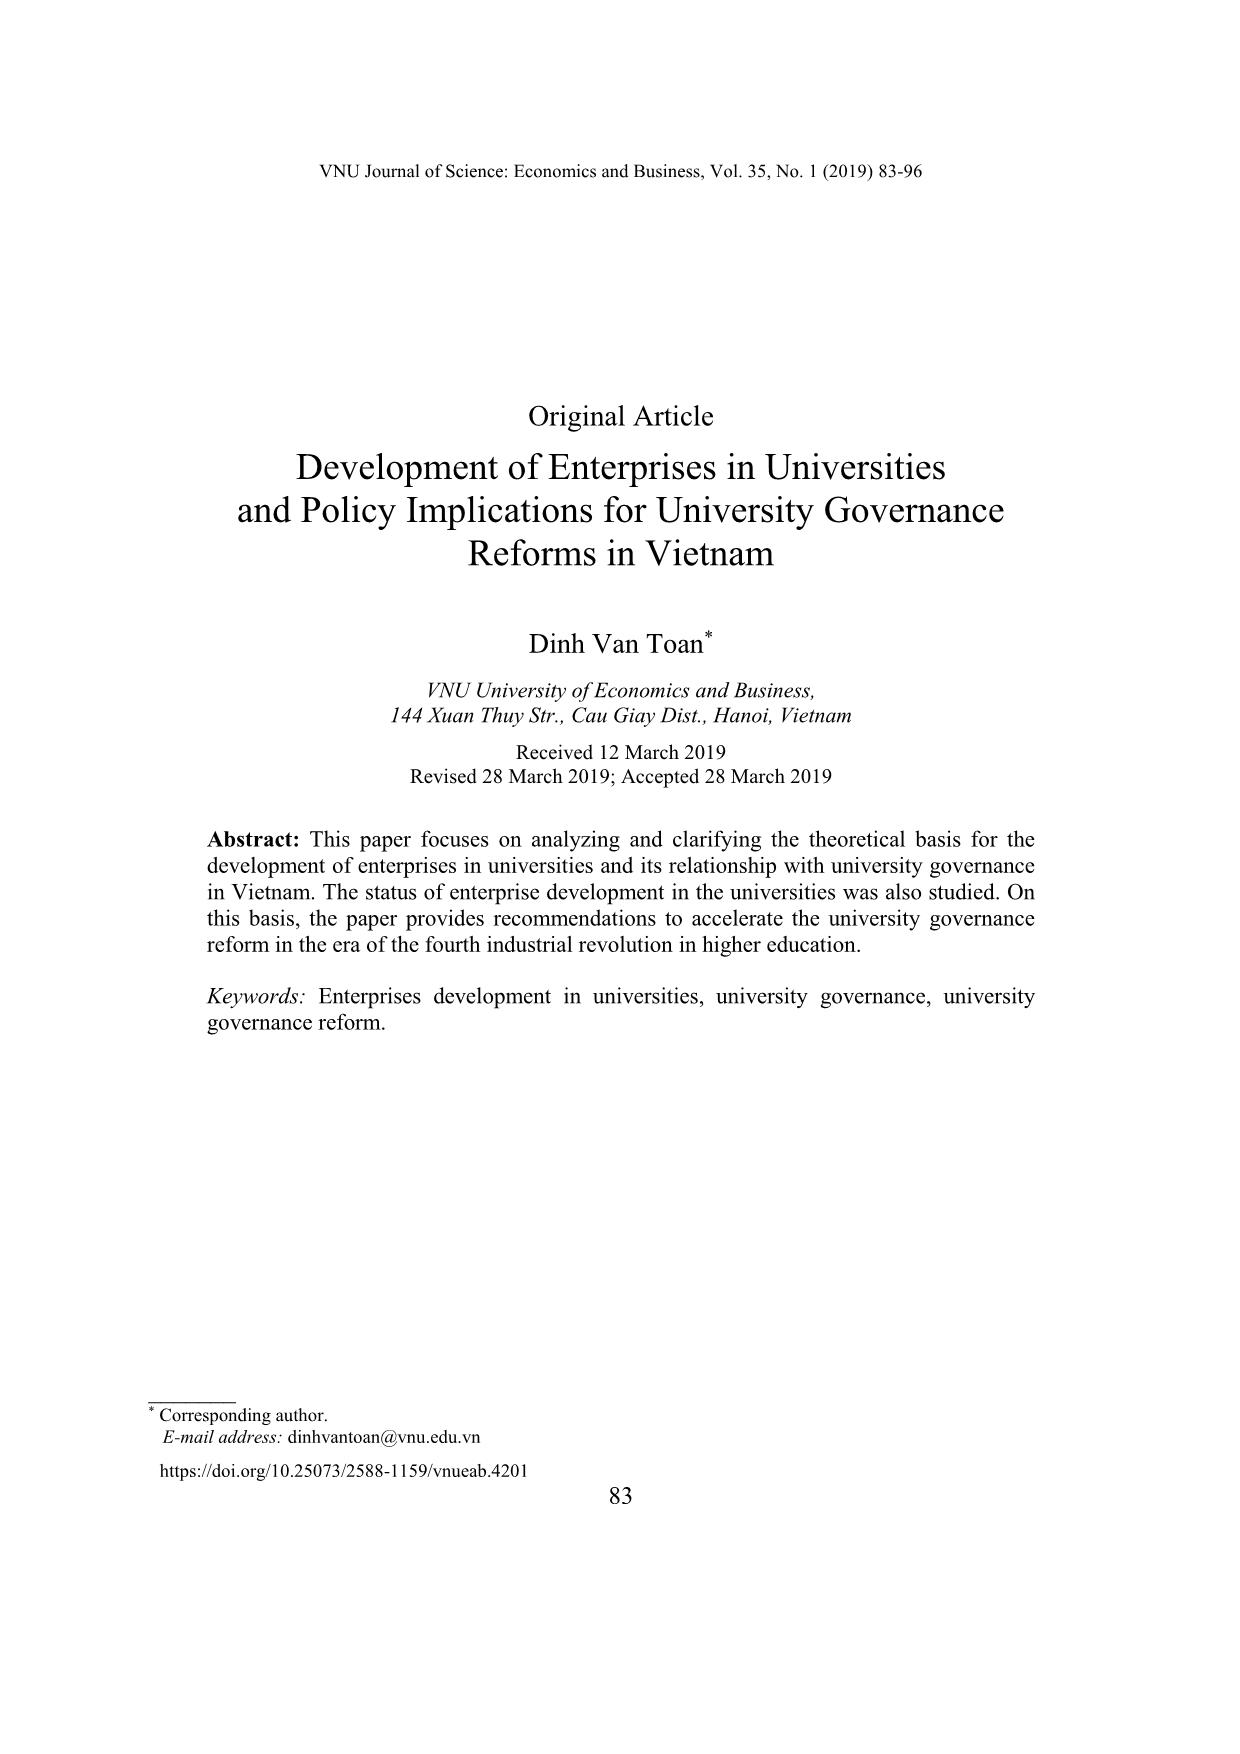 Development of enterprises in Universities and policy implications for University governance reforms in Vietnam trang 1